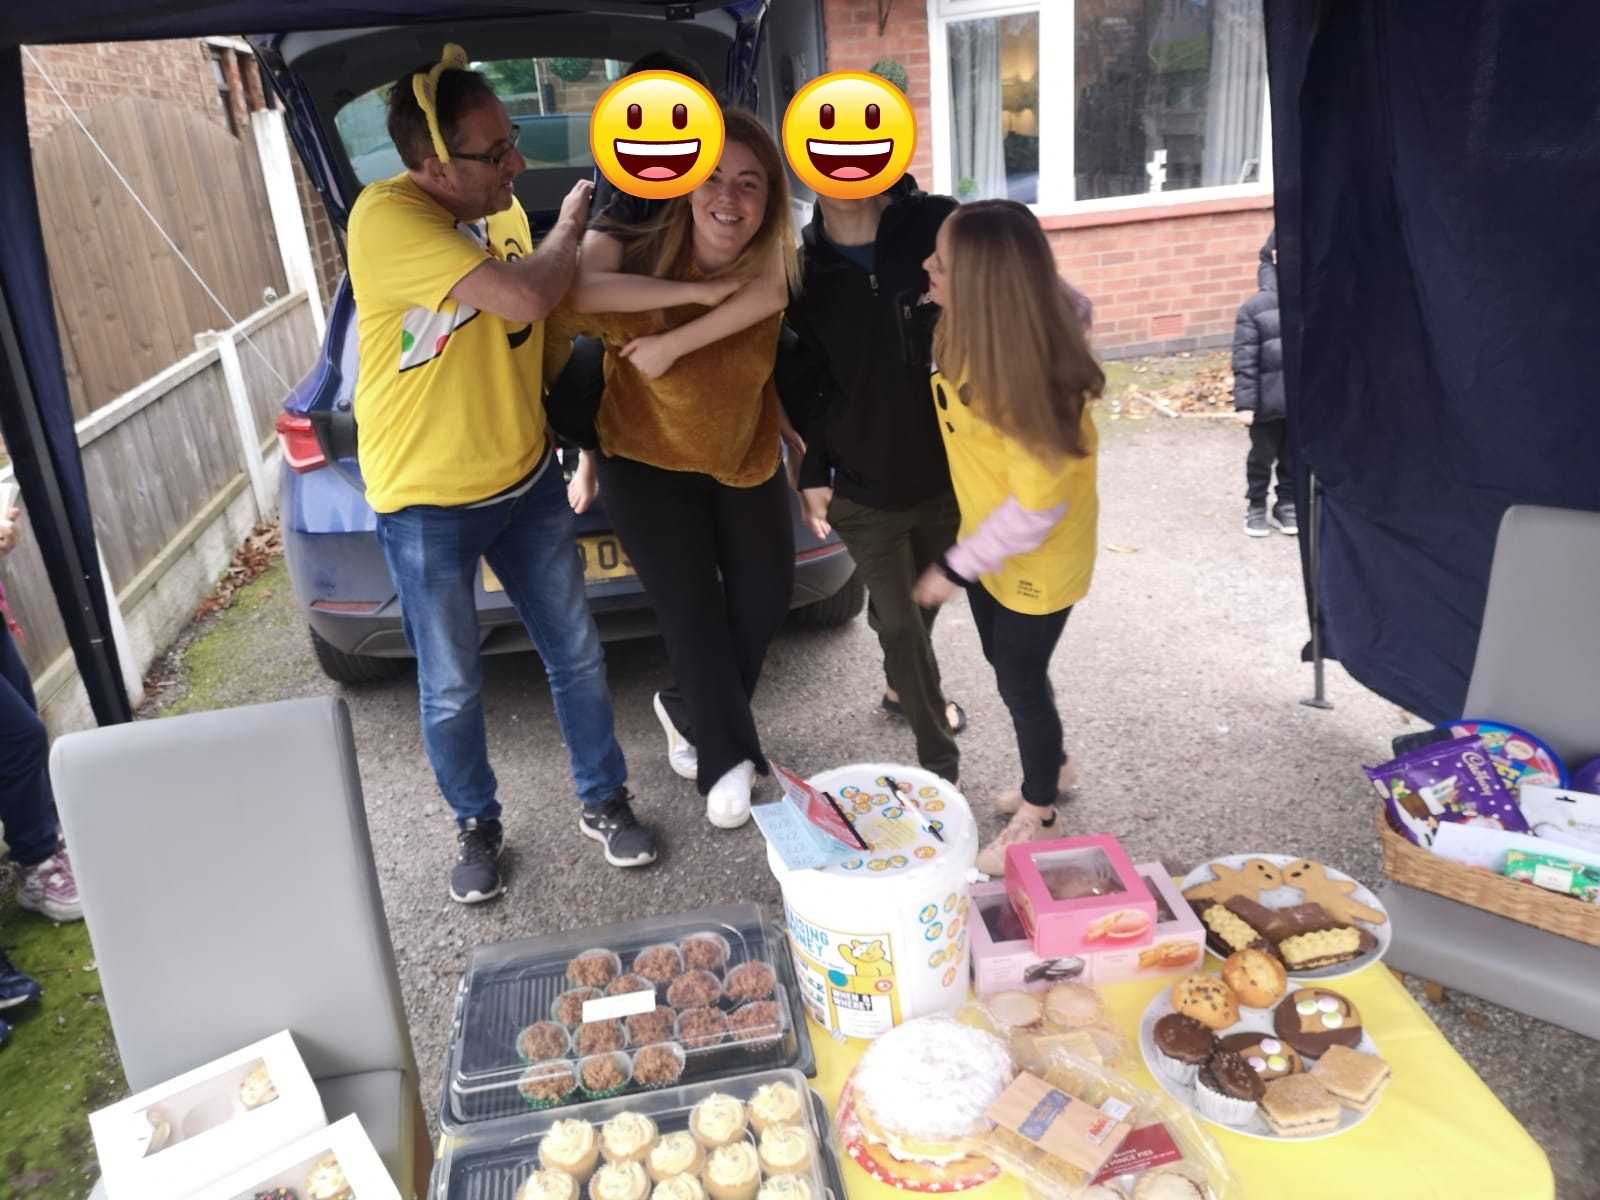 Douglas House Bake Sale Children in Need, New Horizons NW, Residential Childrens Care (2)